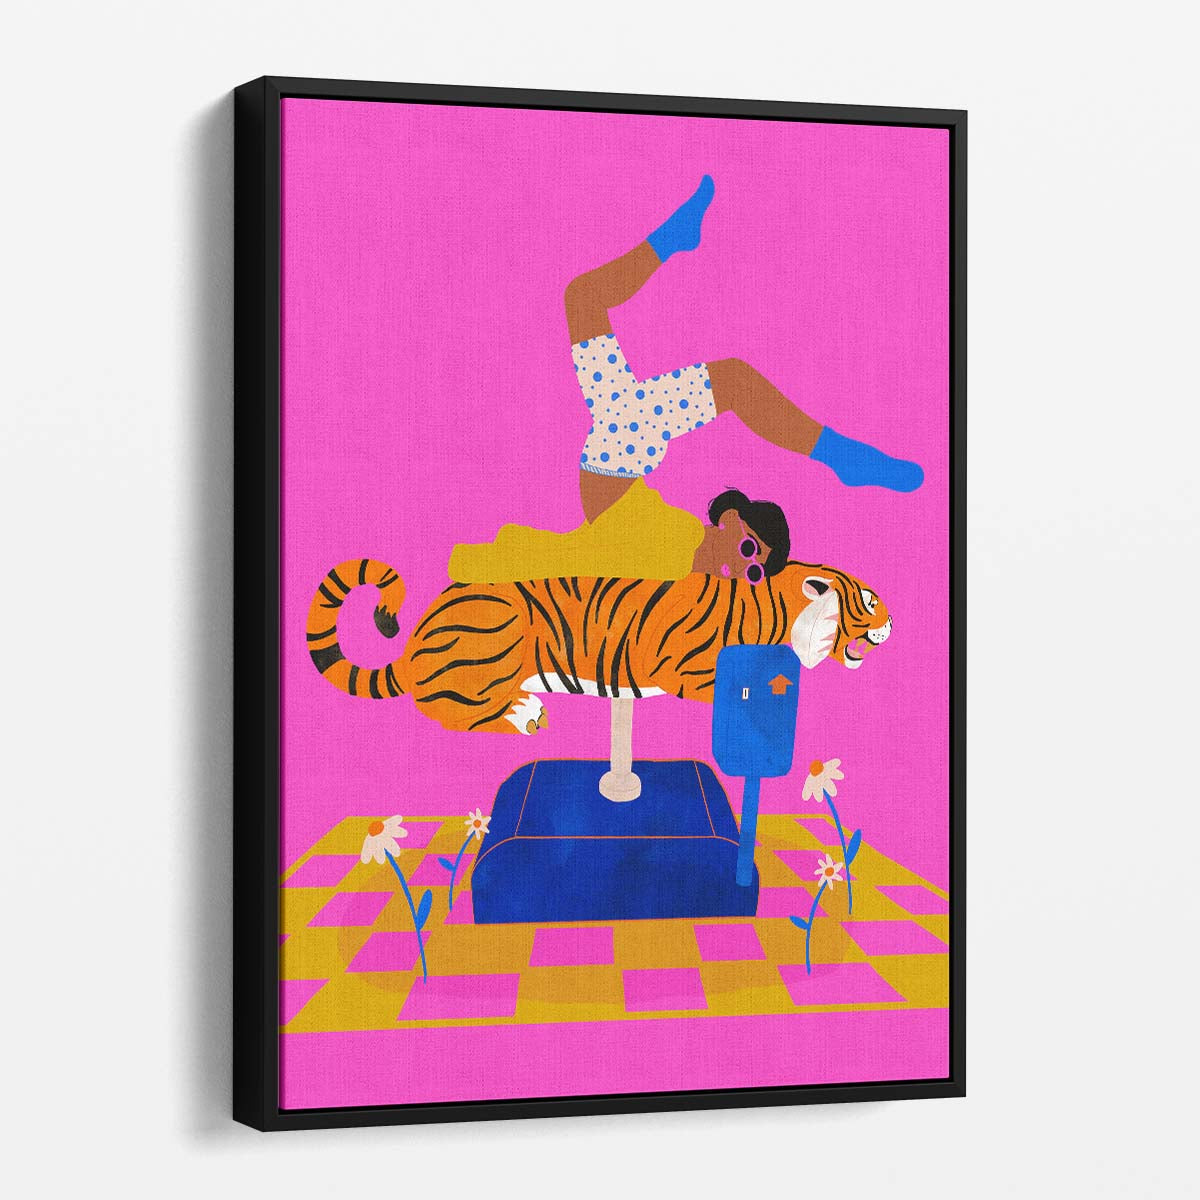 Surreal Floral Woman Posing on Tiger Illustration Art by Luxuriance Designs, made in USA